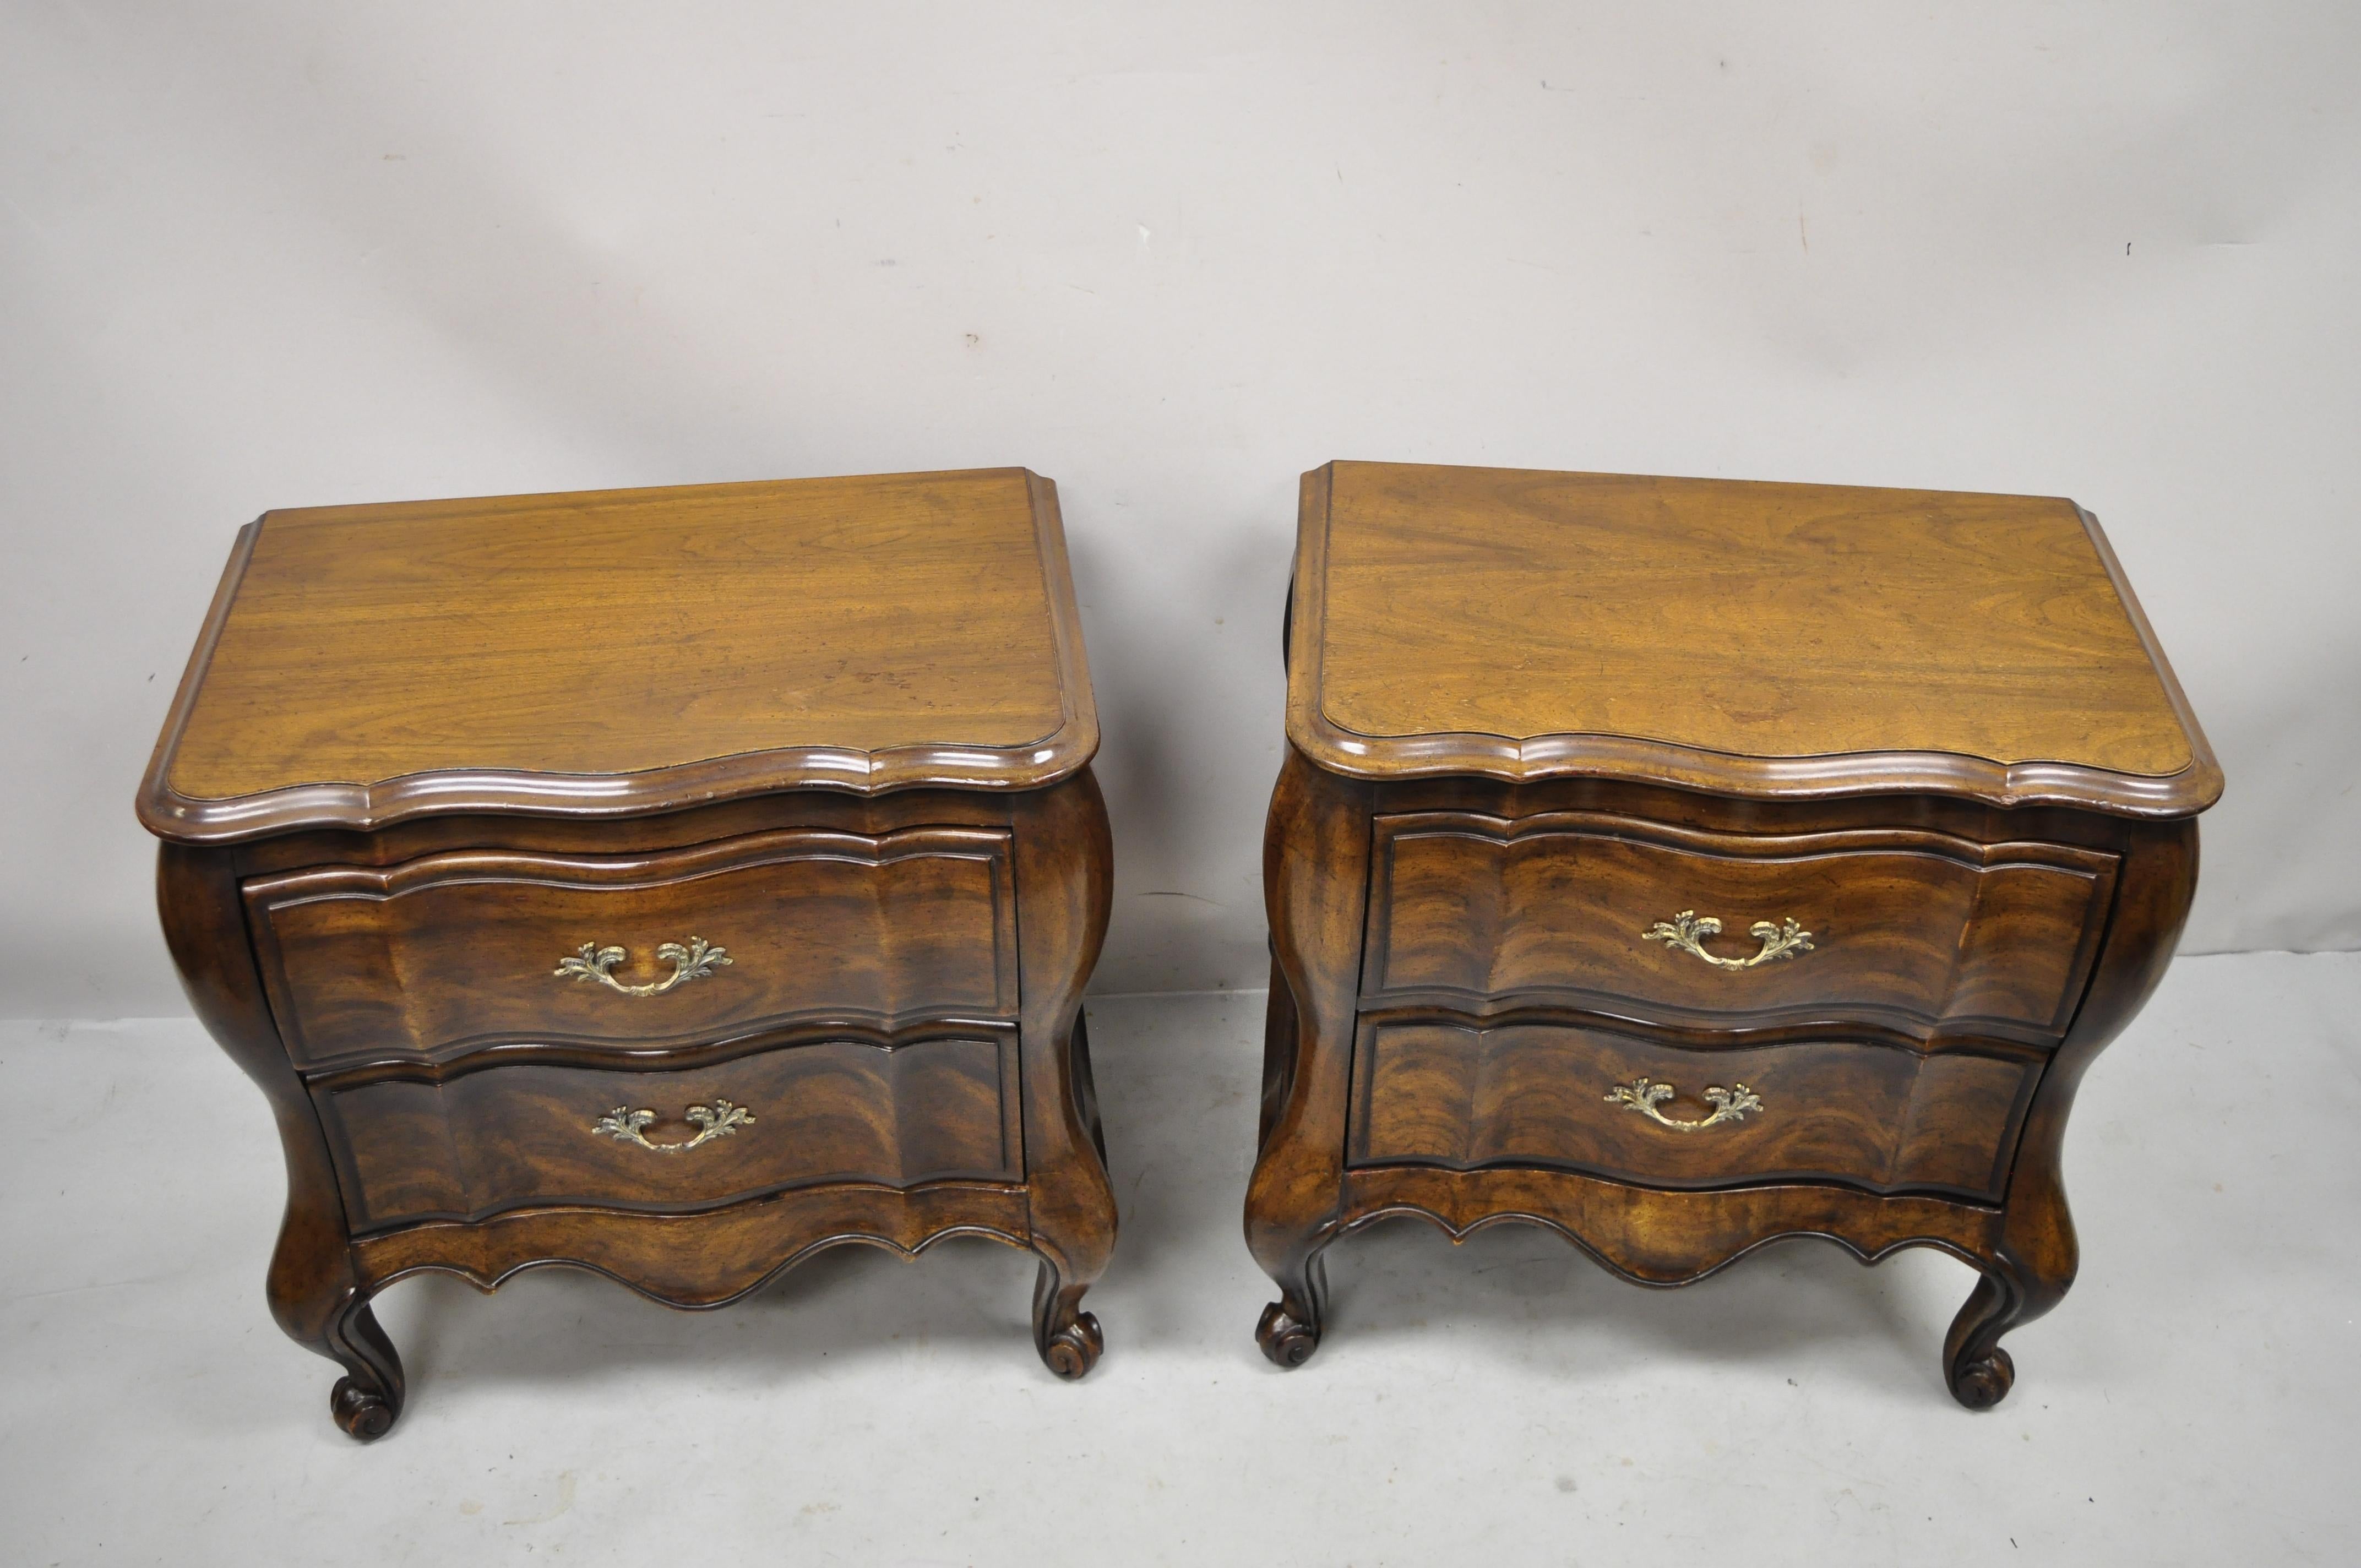 20th Century Vintage French Provincial Cherry Bombe Nightstands by White Furniture, a Pair